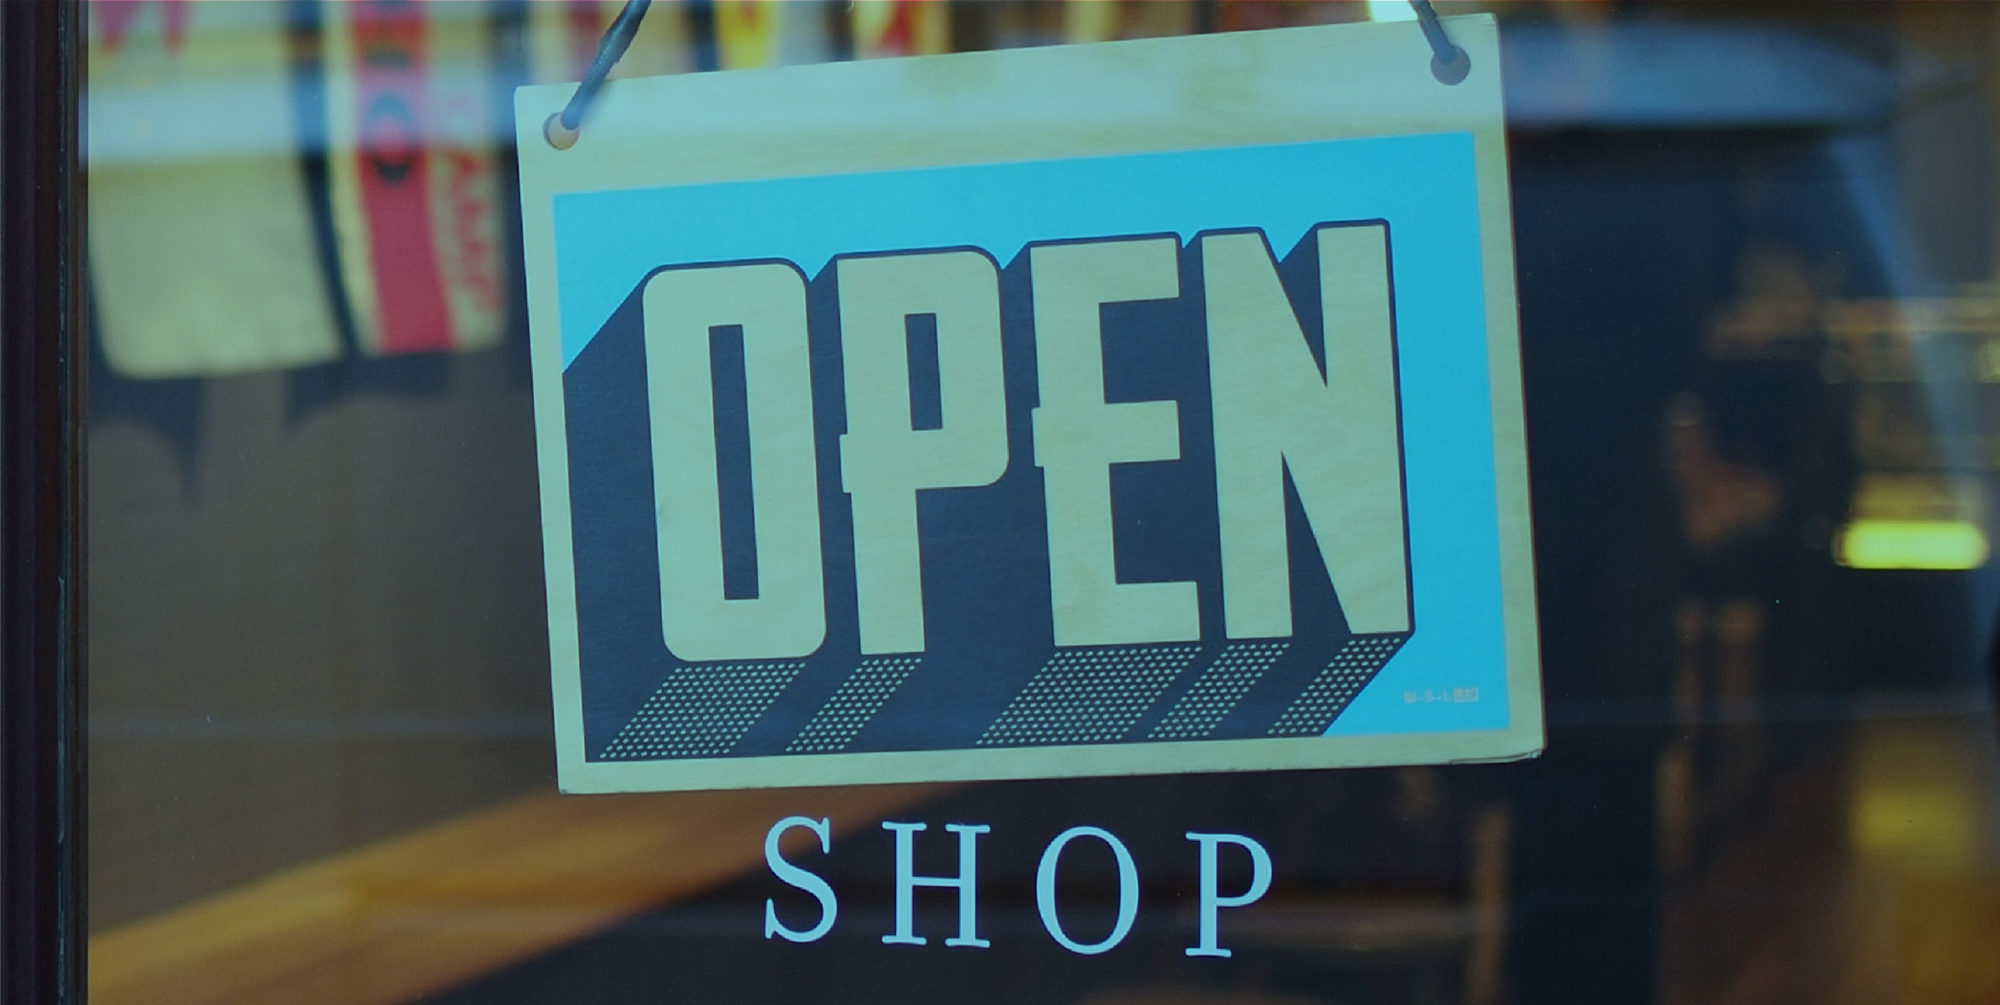 A store sign with an "Open Shop" sign hanging.